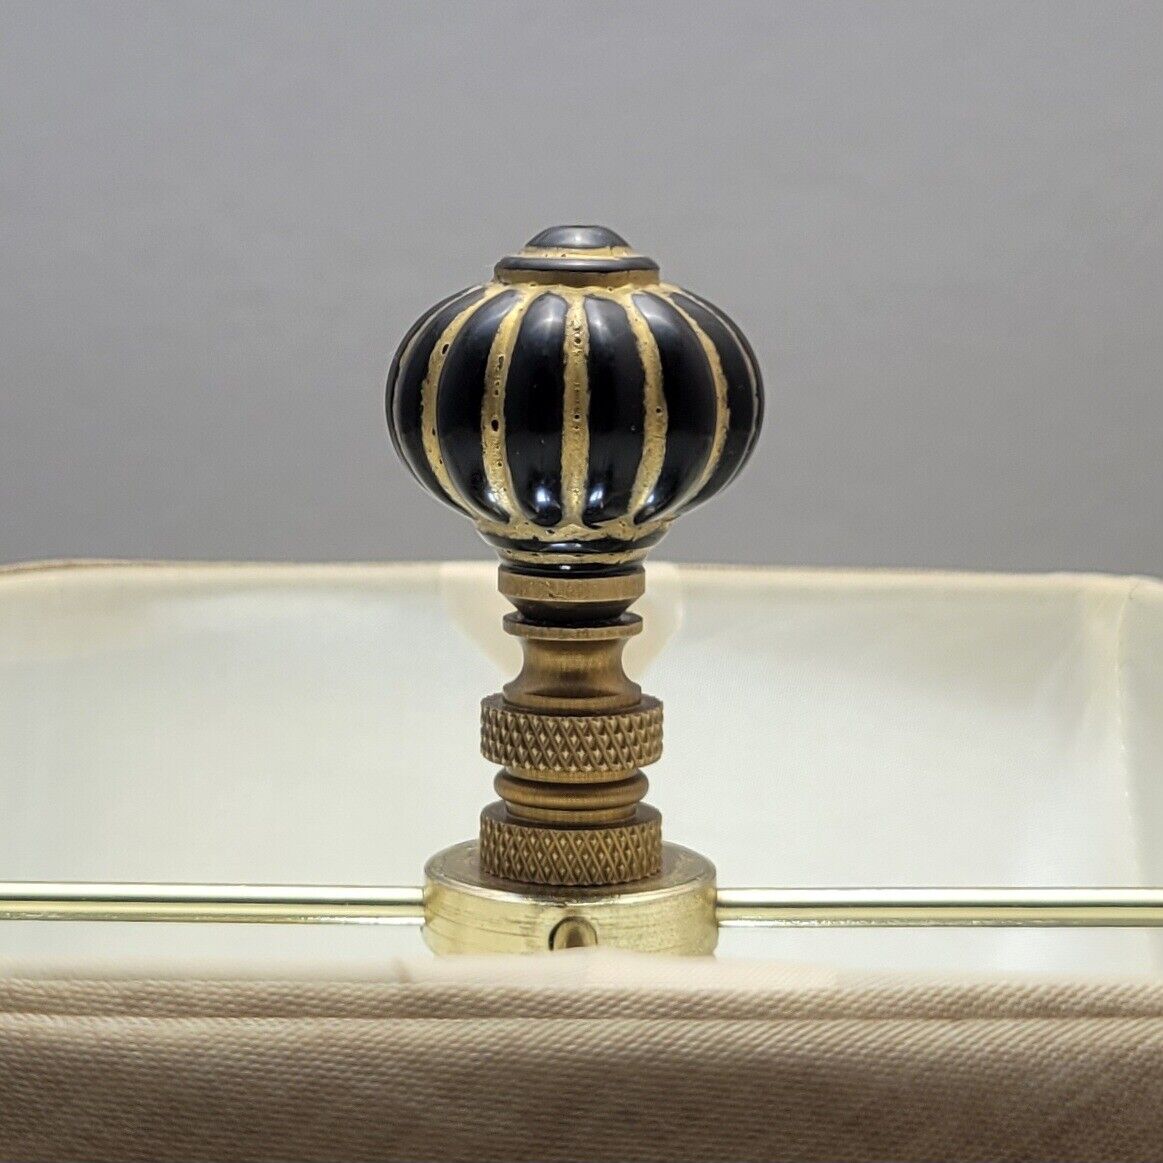 Black/Gold, Acrylic, Antique Style Lamp Finials Polished or Antique Brass Bases